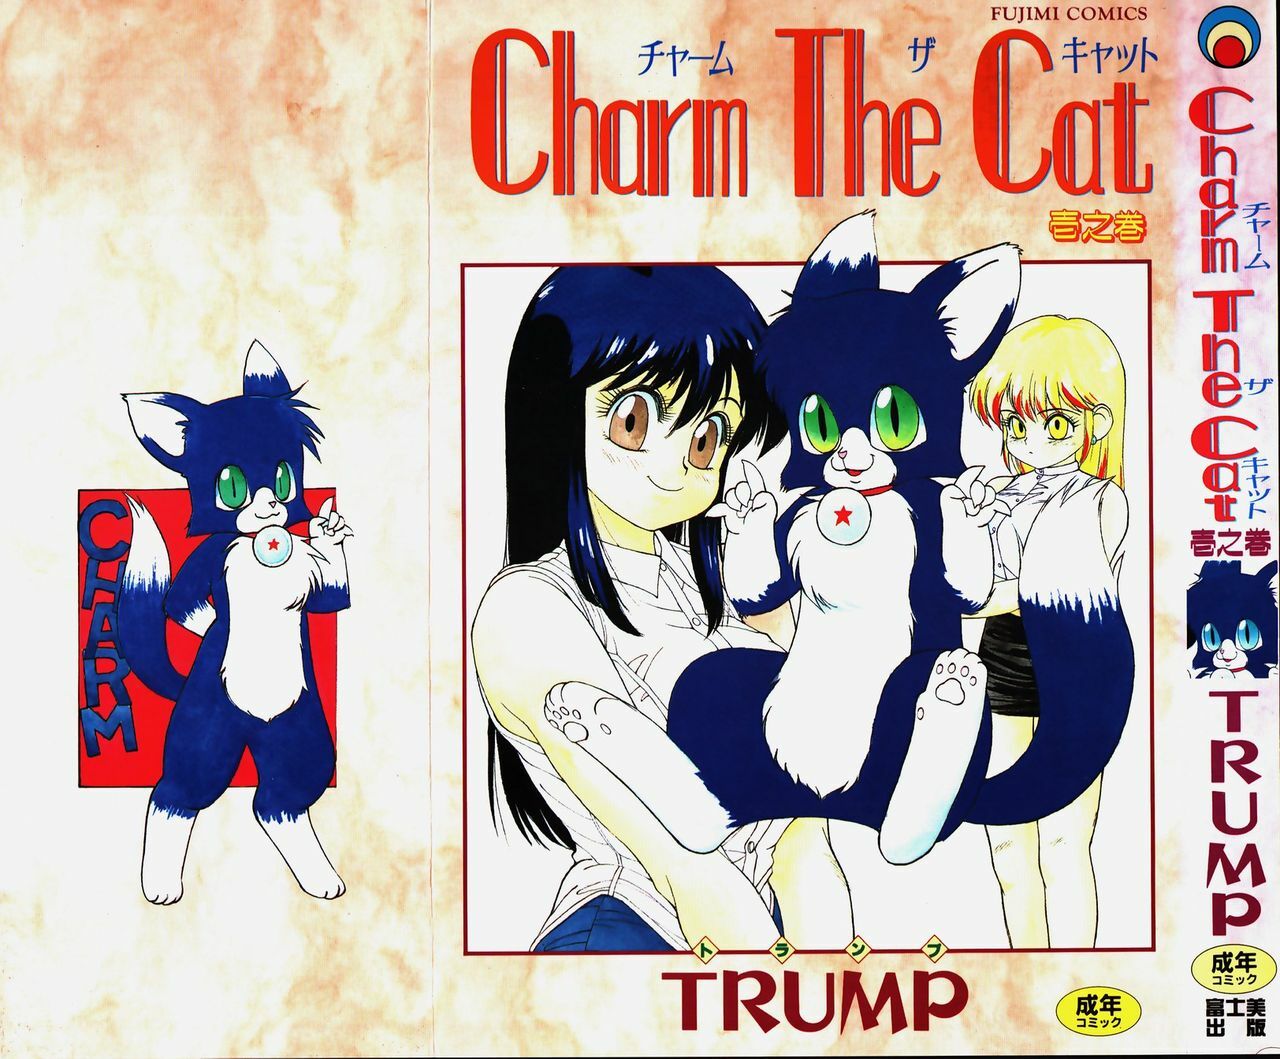 [Trump] Charm The Cat page 1 full